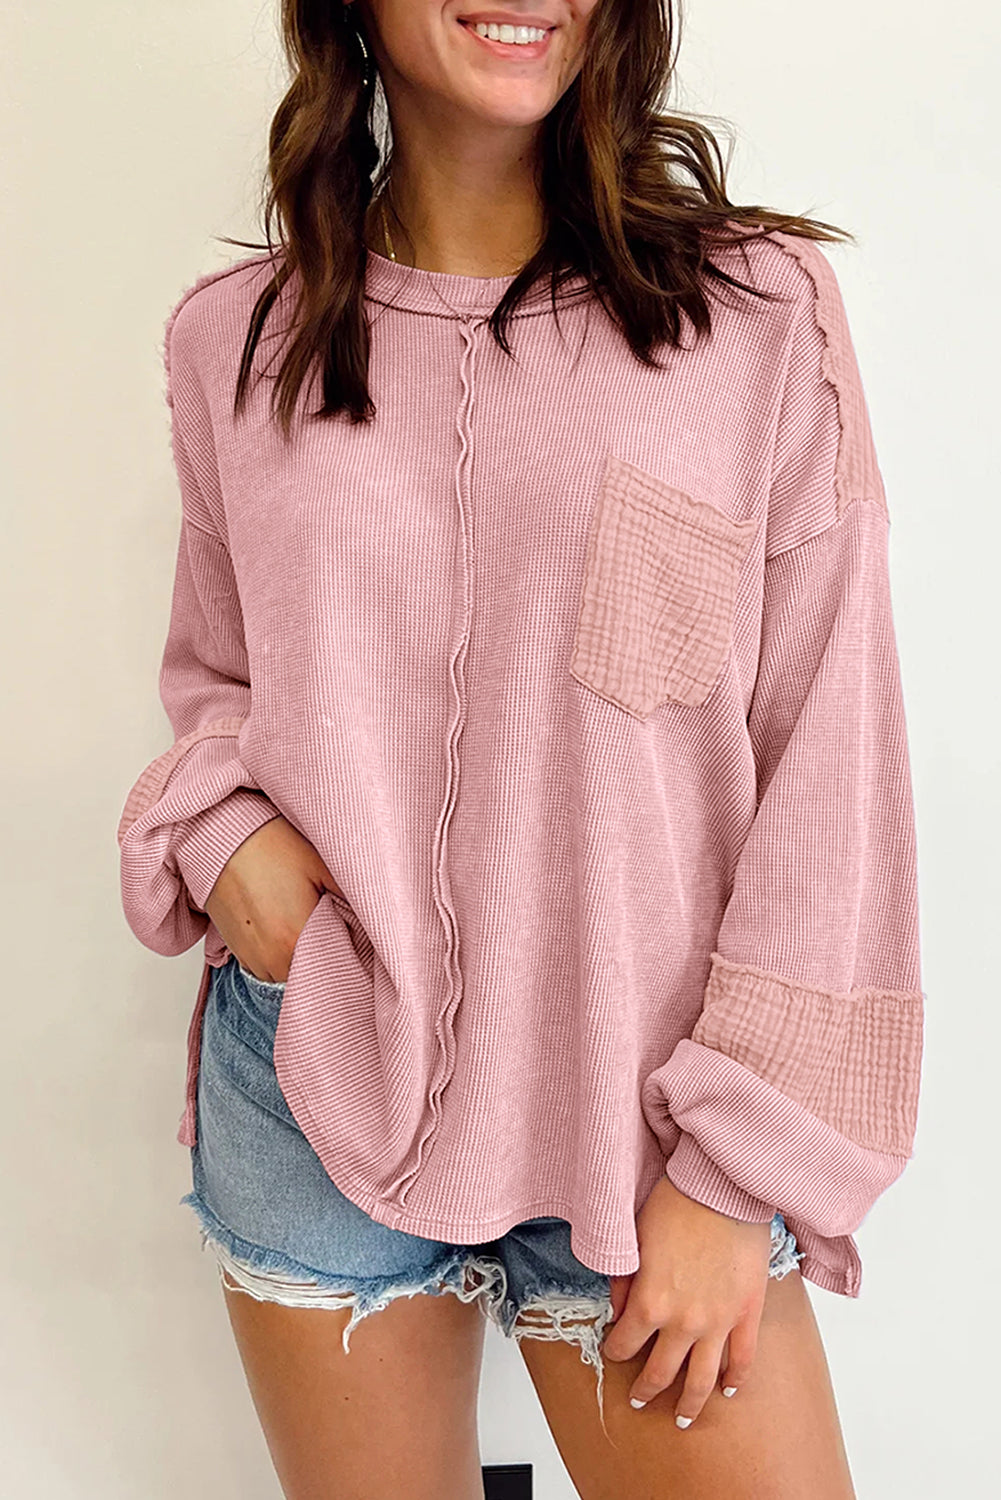 Black exposed seam patchwork bubble sleeve waffle knit top - pink / 2xl / 62.7% polyester + 37.3% cotton - tops